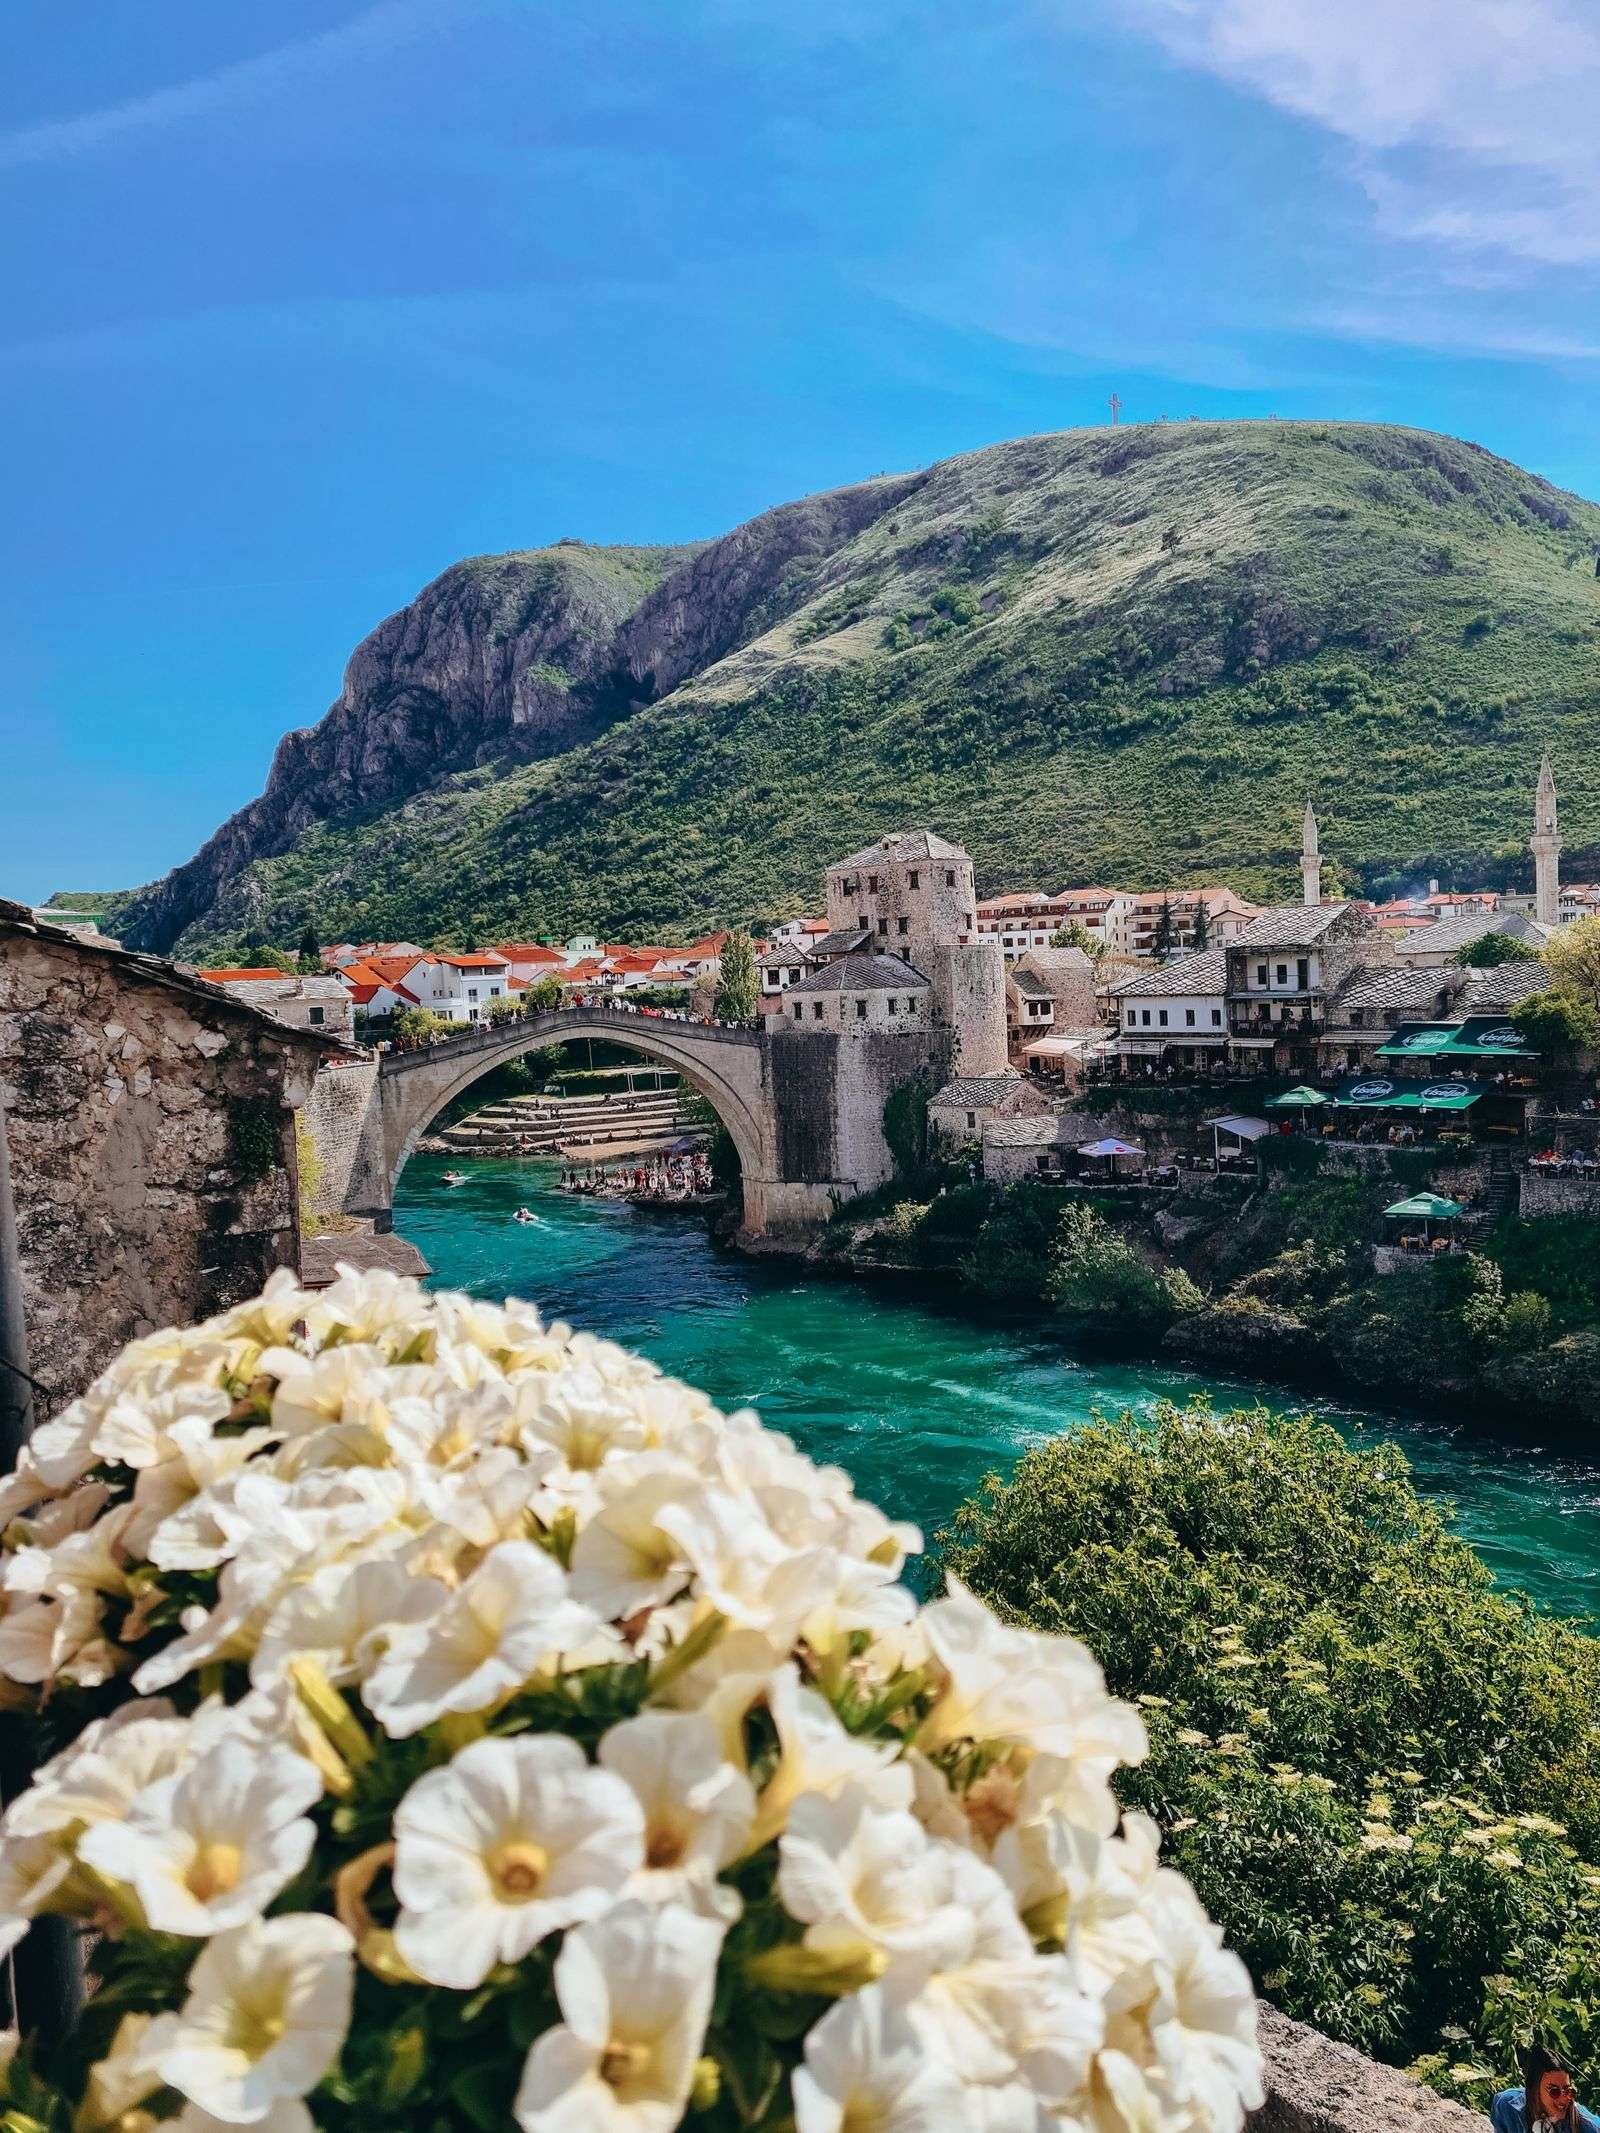 the old stone bridge in Mostar, across a turquoise river with houes and a mountain behind